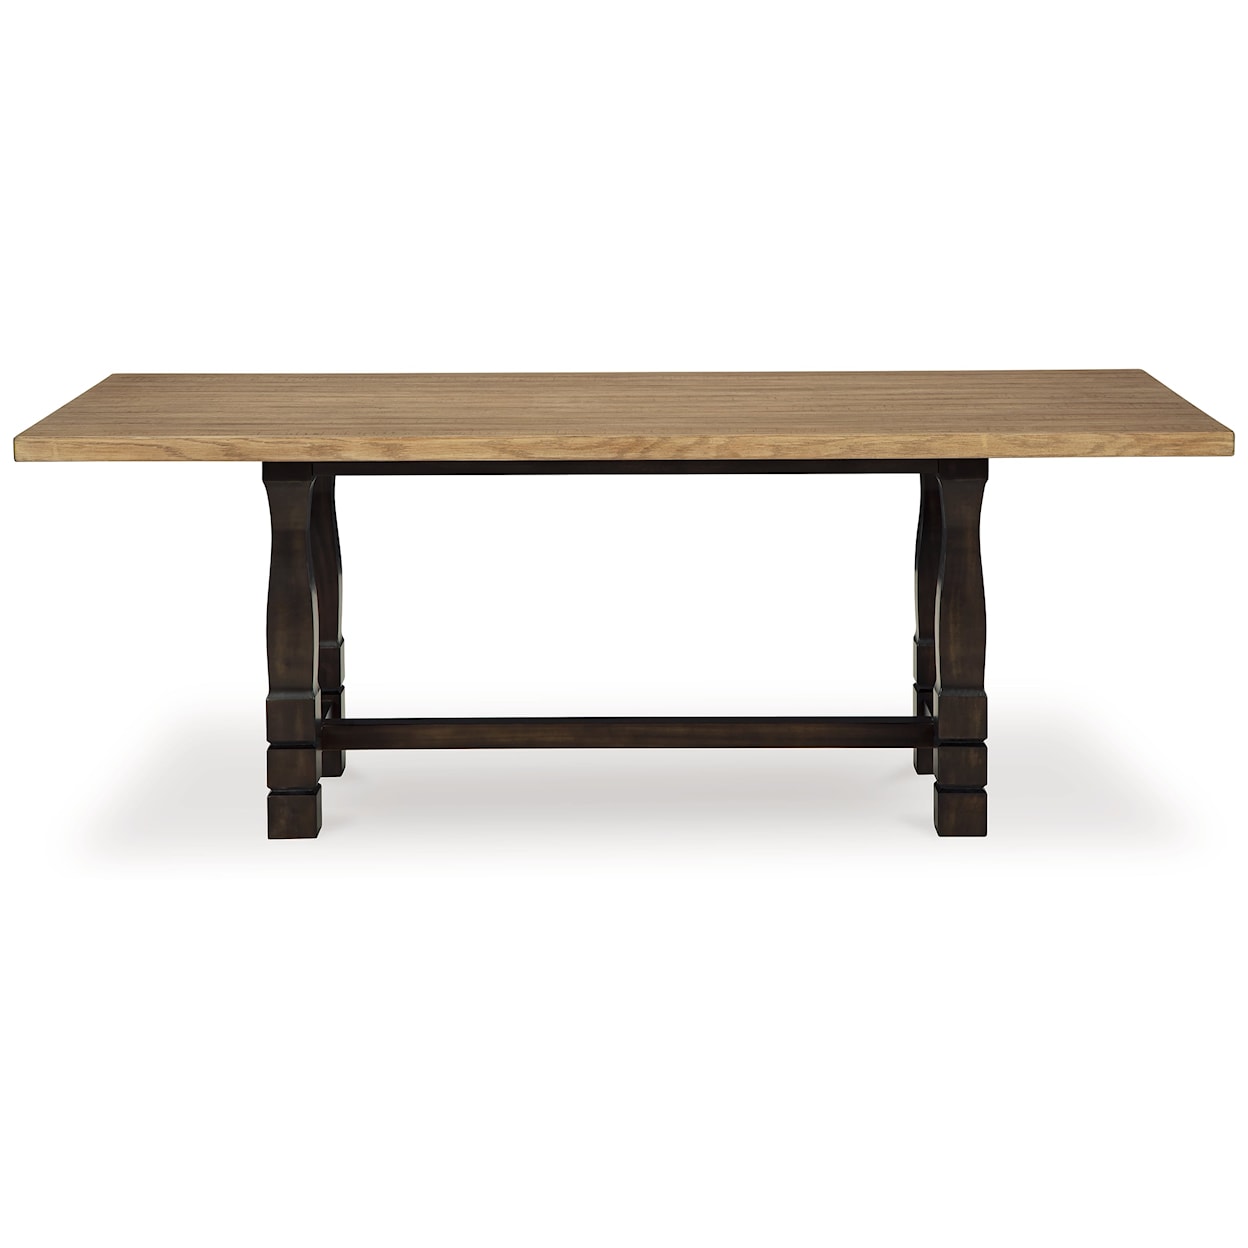 Signature Design by Ashley Furniture Charterton Rectangular Dining Room Table